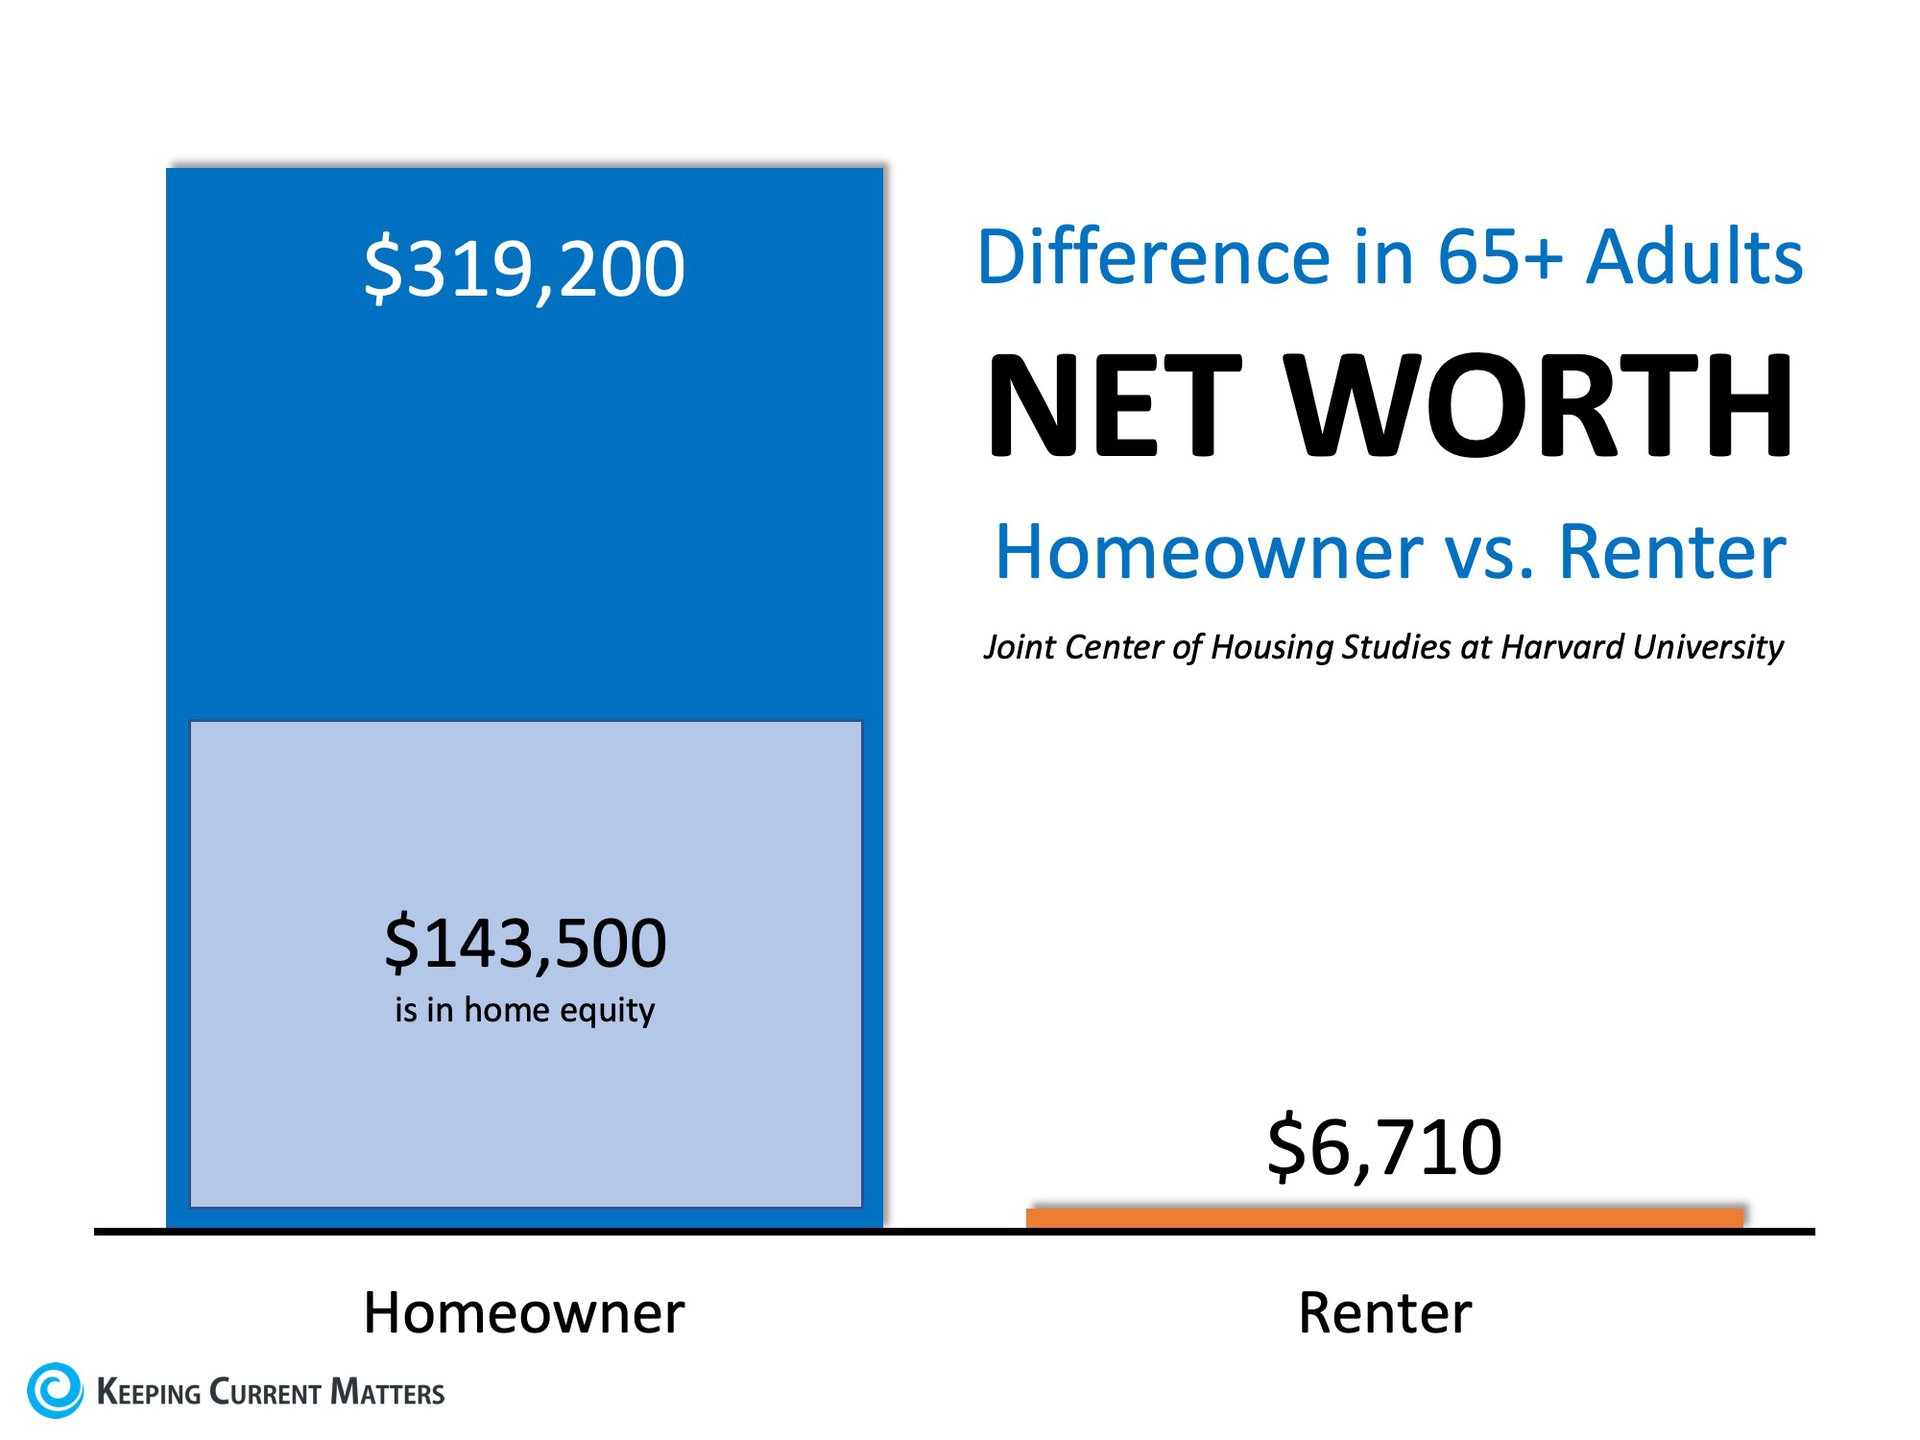 Homeowners Aged 65+ Have 48x More Net Worth Than Renters | Keeping Current Matters